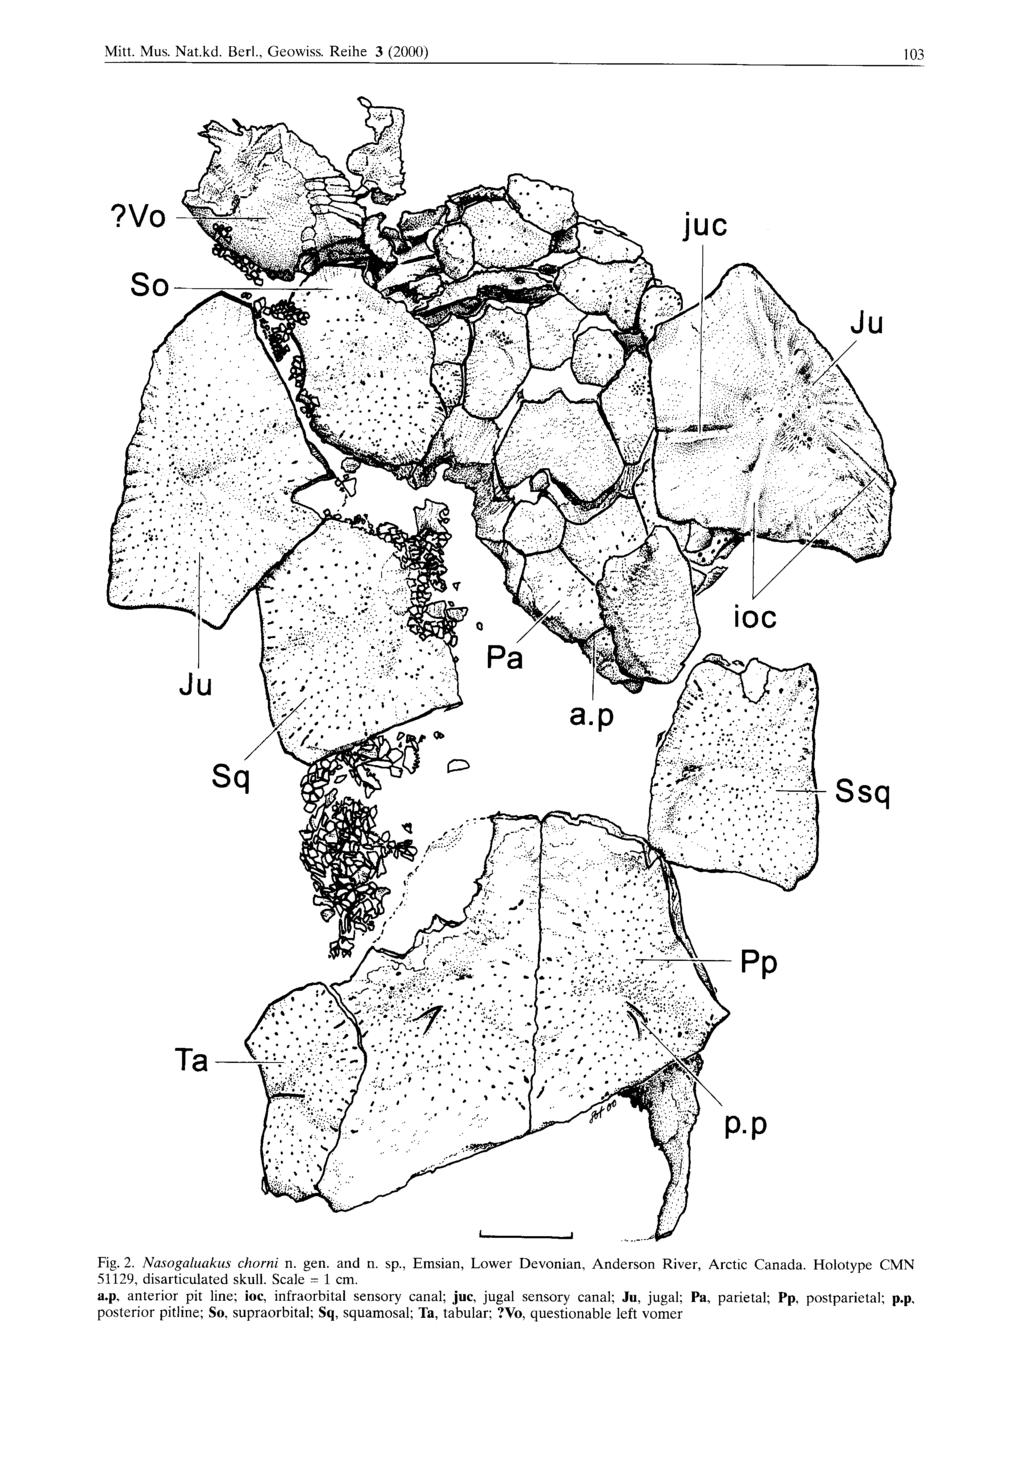 Mitt. Mus. Nat.kd. Berl., Geowiss. Reihe 3 (2000) 103 Fig. 2. Nasogaluakus chorni n. gen. and n. sp., Emsian, Lower Devonian, Anderson River, Arctic Canada. Holotype CMN 51129, disarticulated skull.